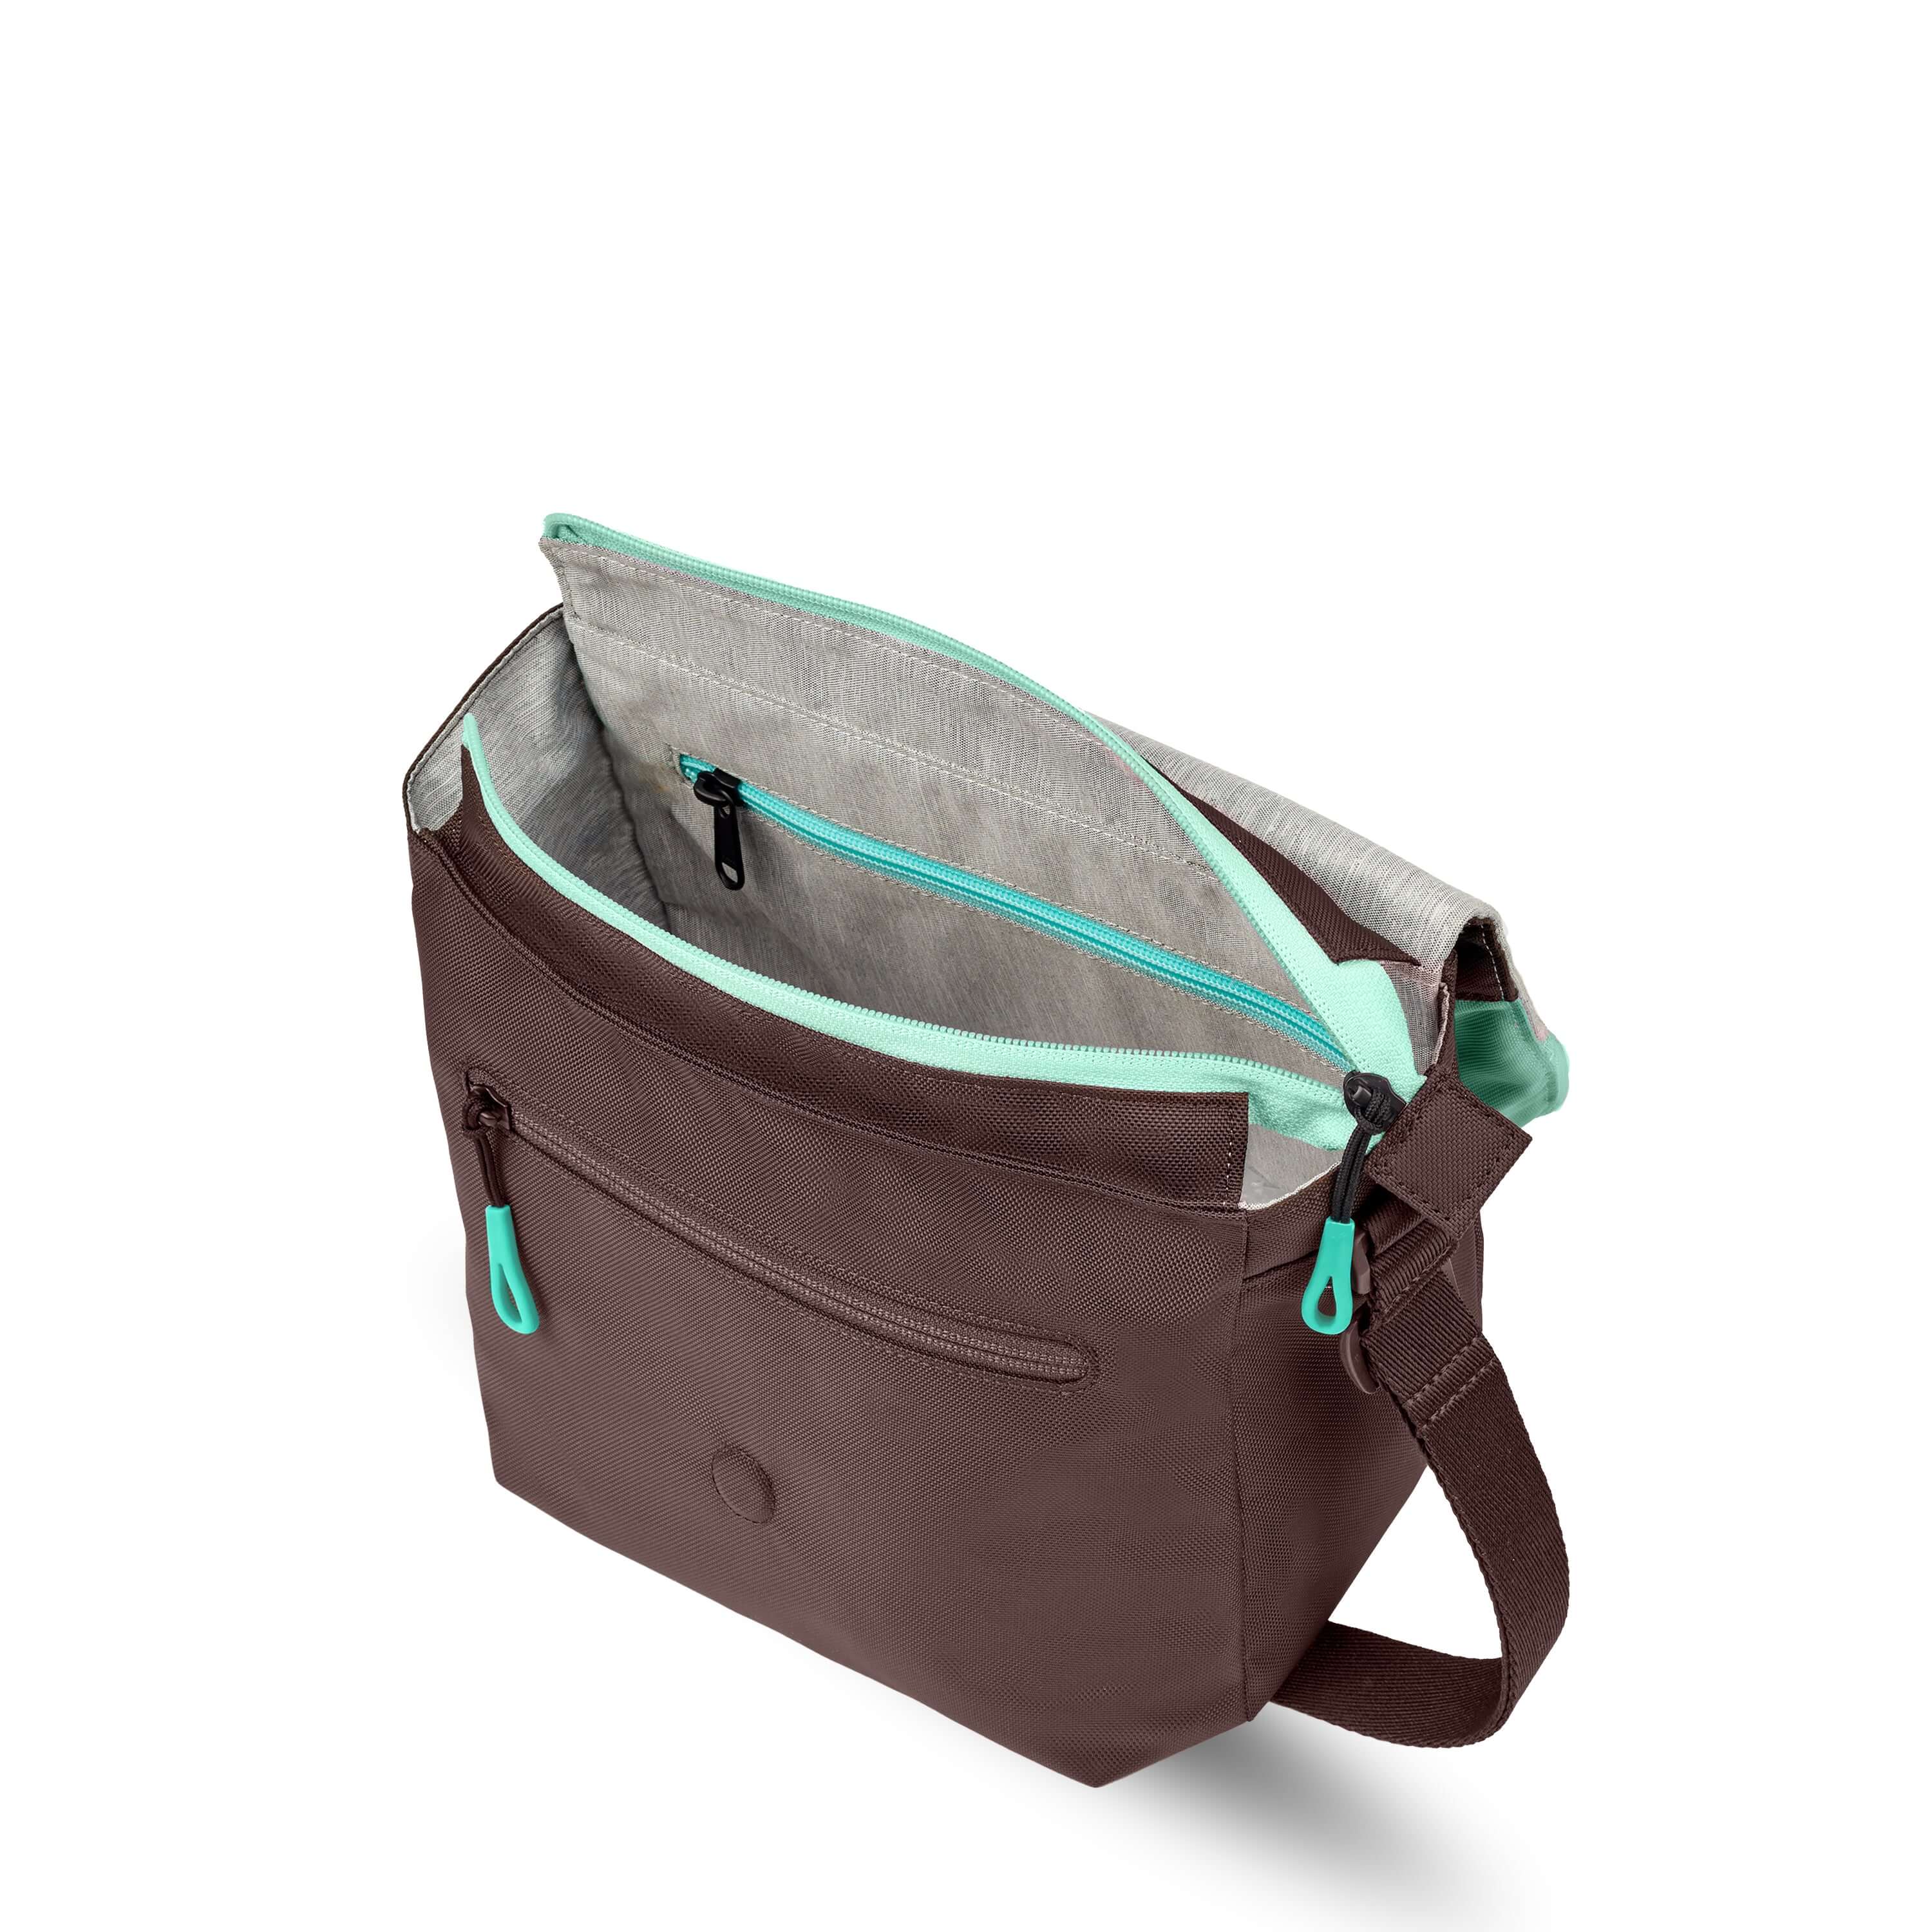 Top view of Sherpani crossbody, the Milli in Seagreen. The layover flap is folded all the way back and the main zipper compartment of the bag is open. The interior is light gray and features an internal zipper pocket.